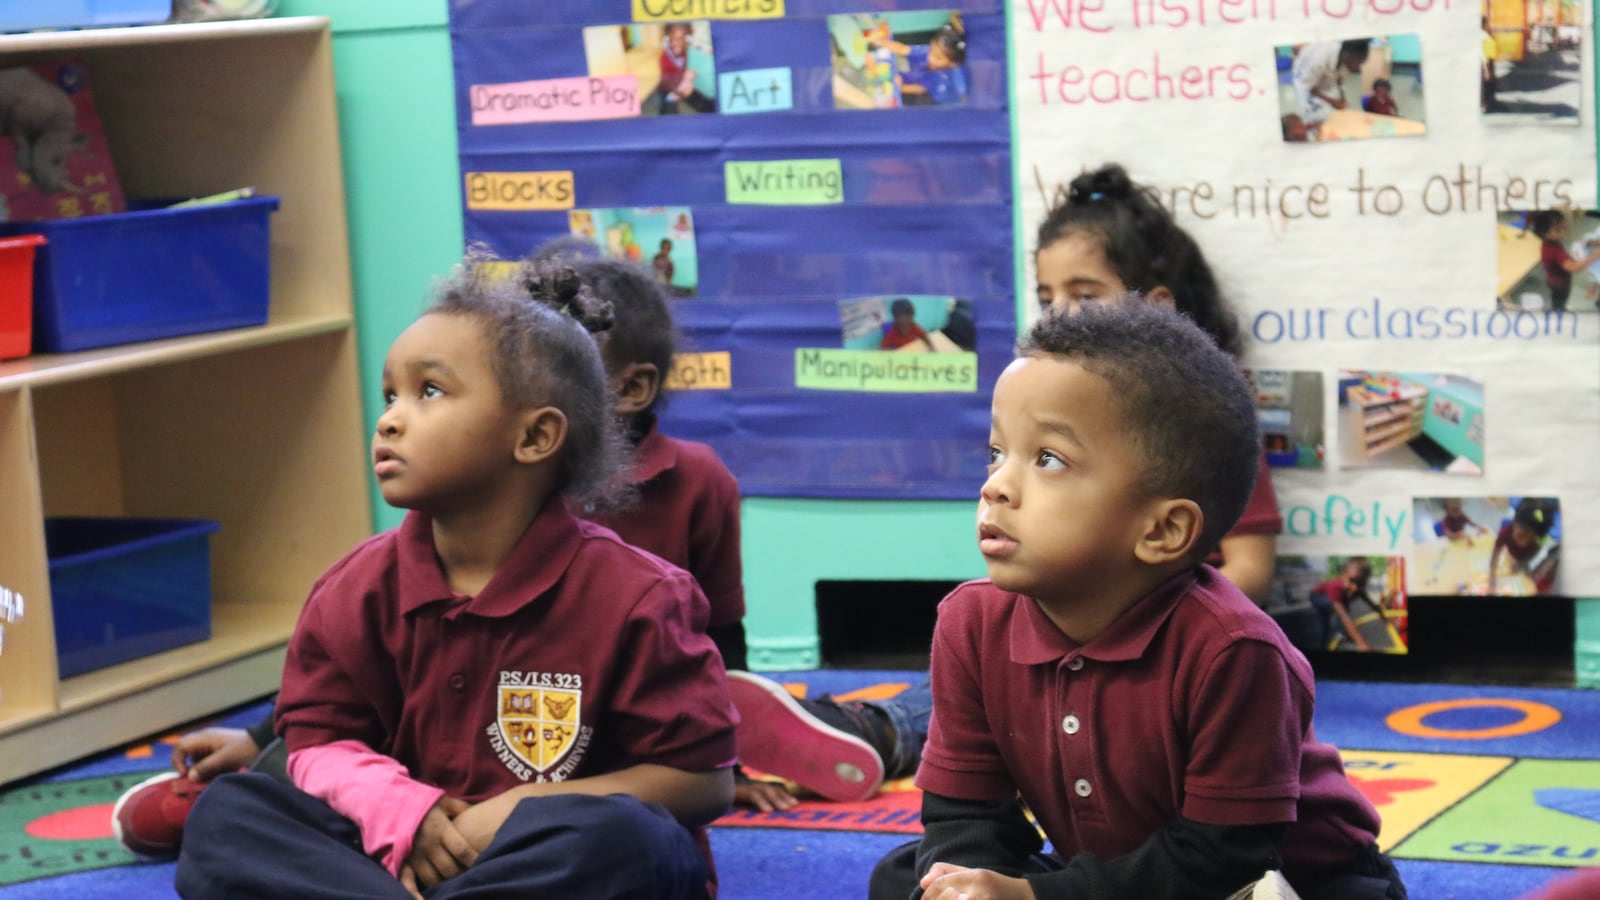 Toddlers wearing red collared shirts sit on a colorful rug in a classroom.